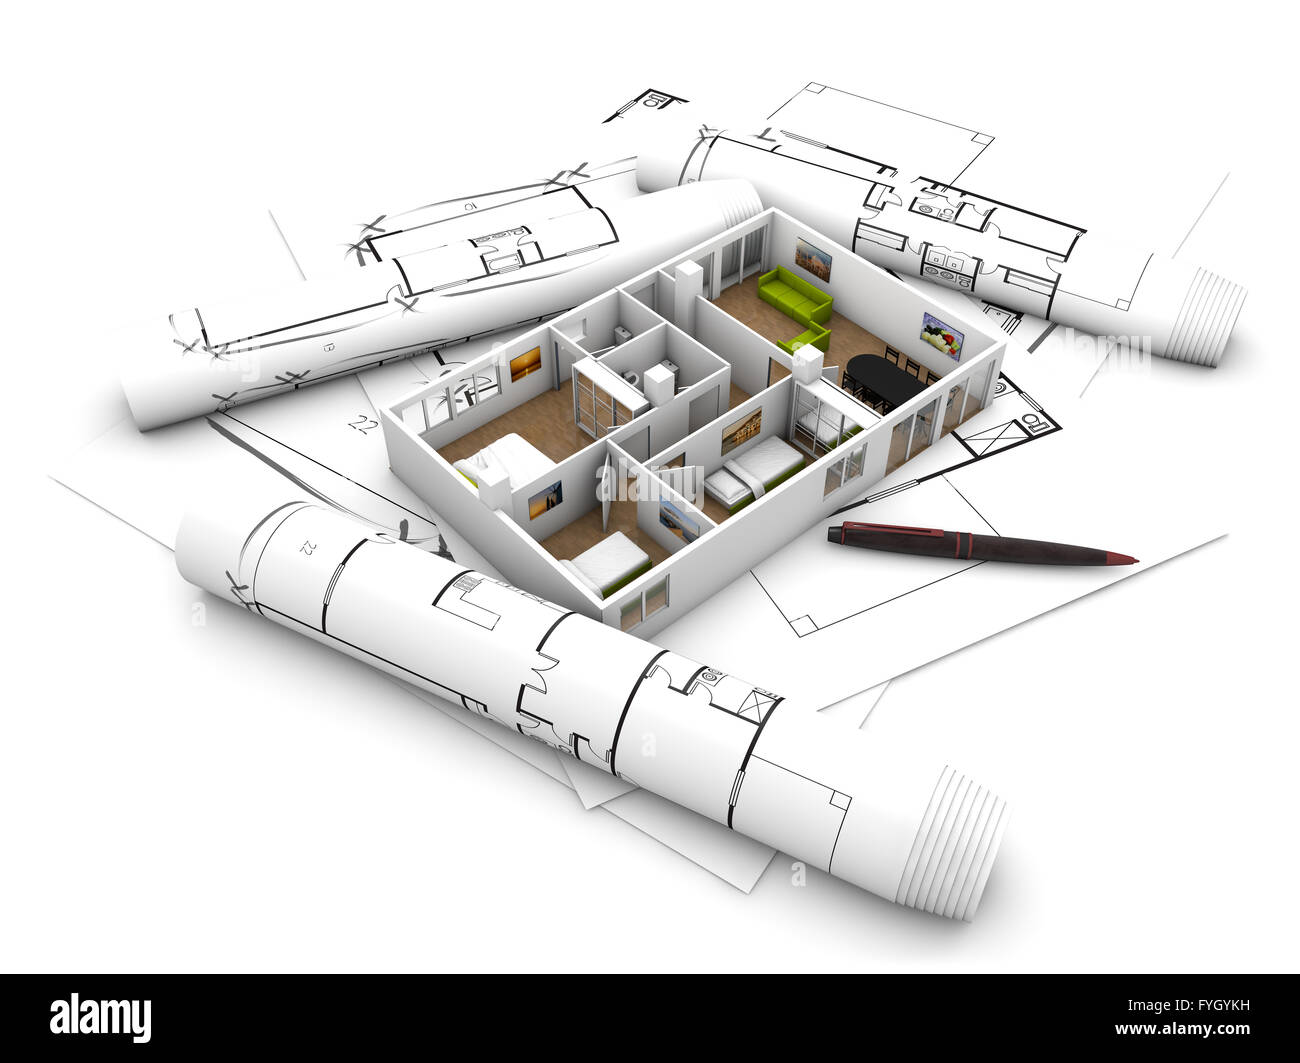 interior design concept: apartament mock-up over plots and architecture draws isolated on white background Stock Photo